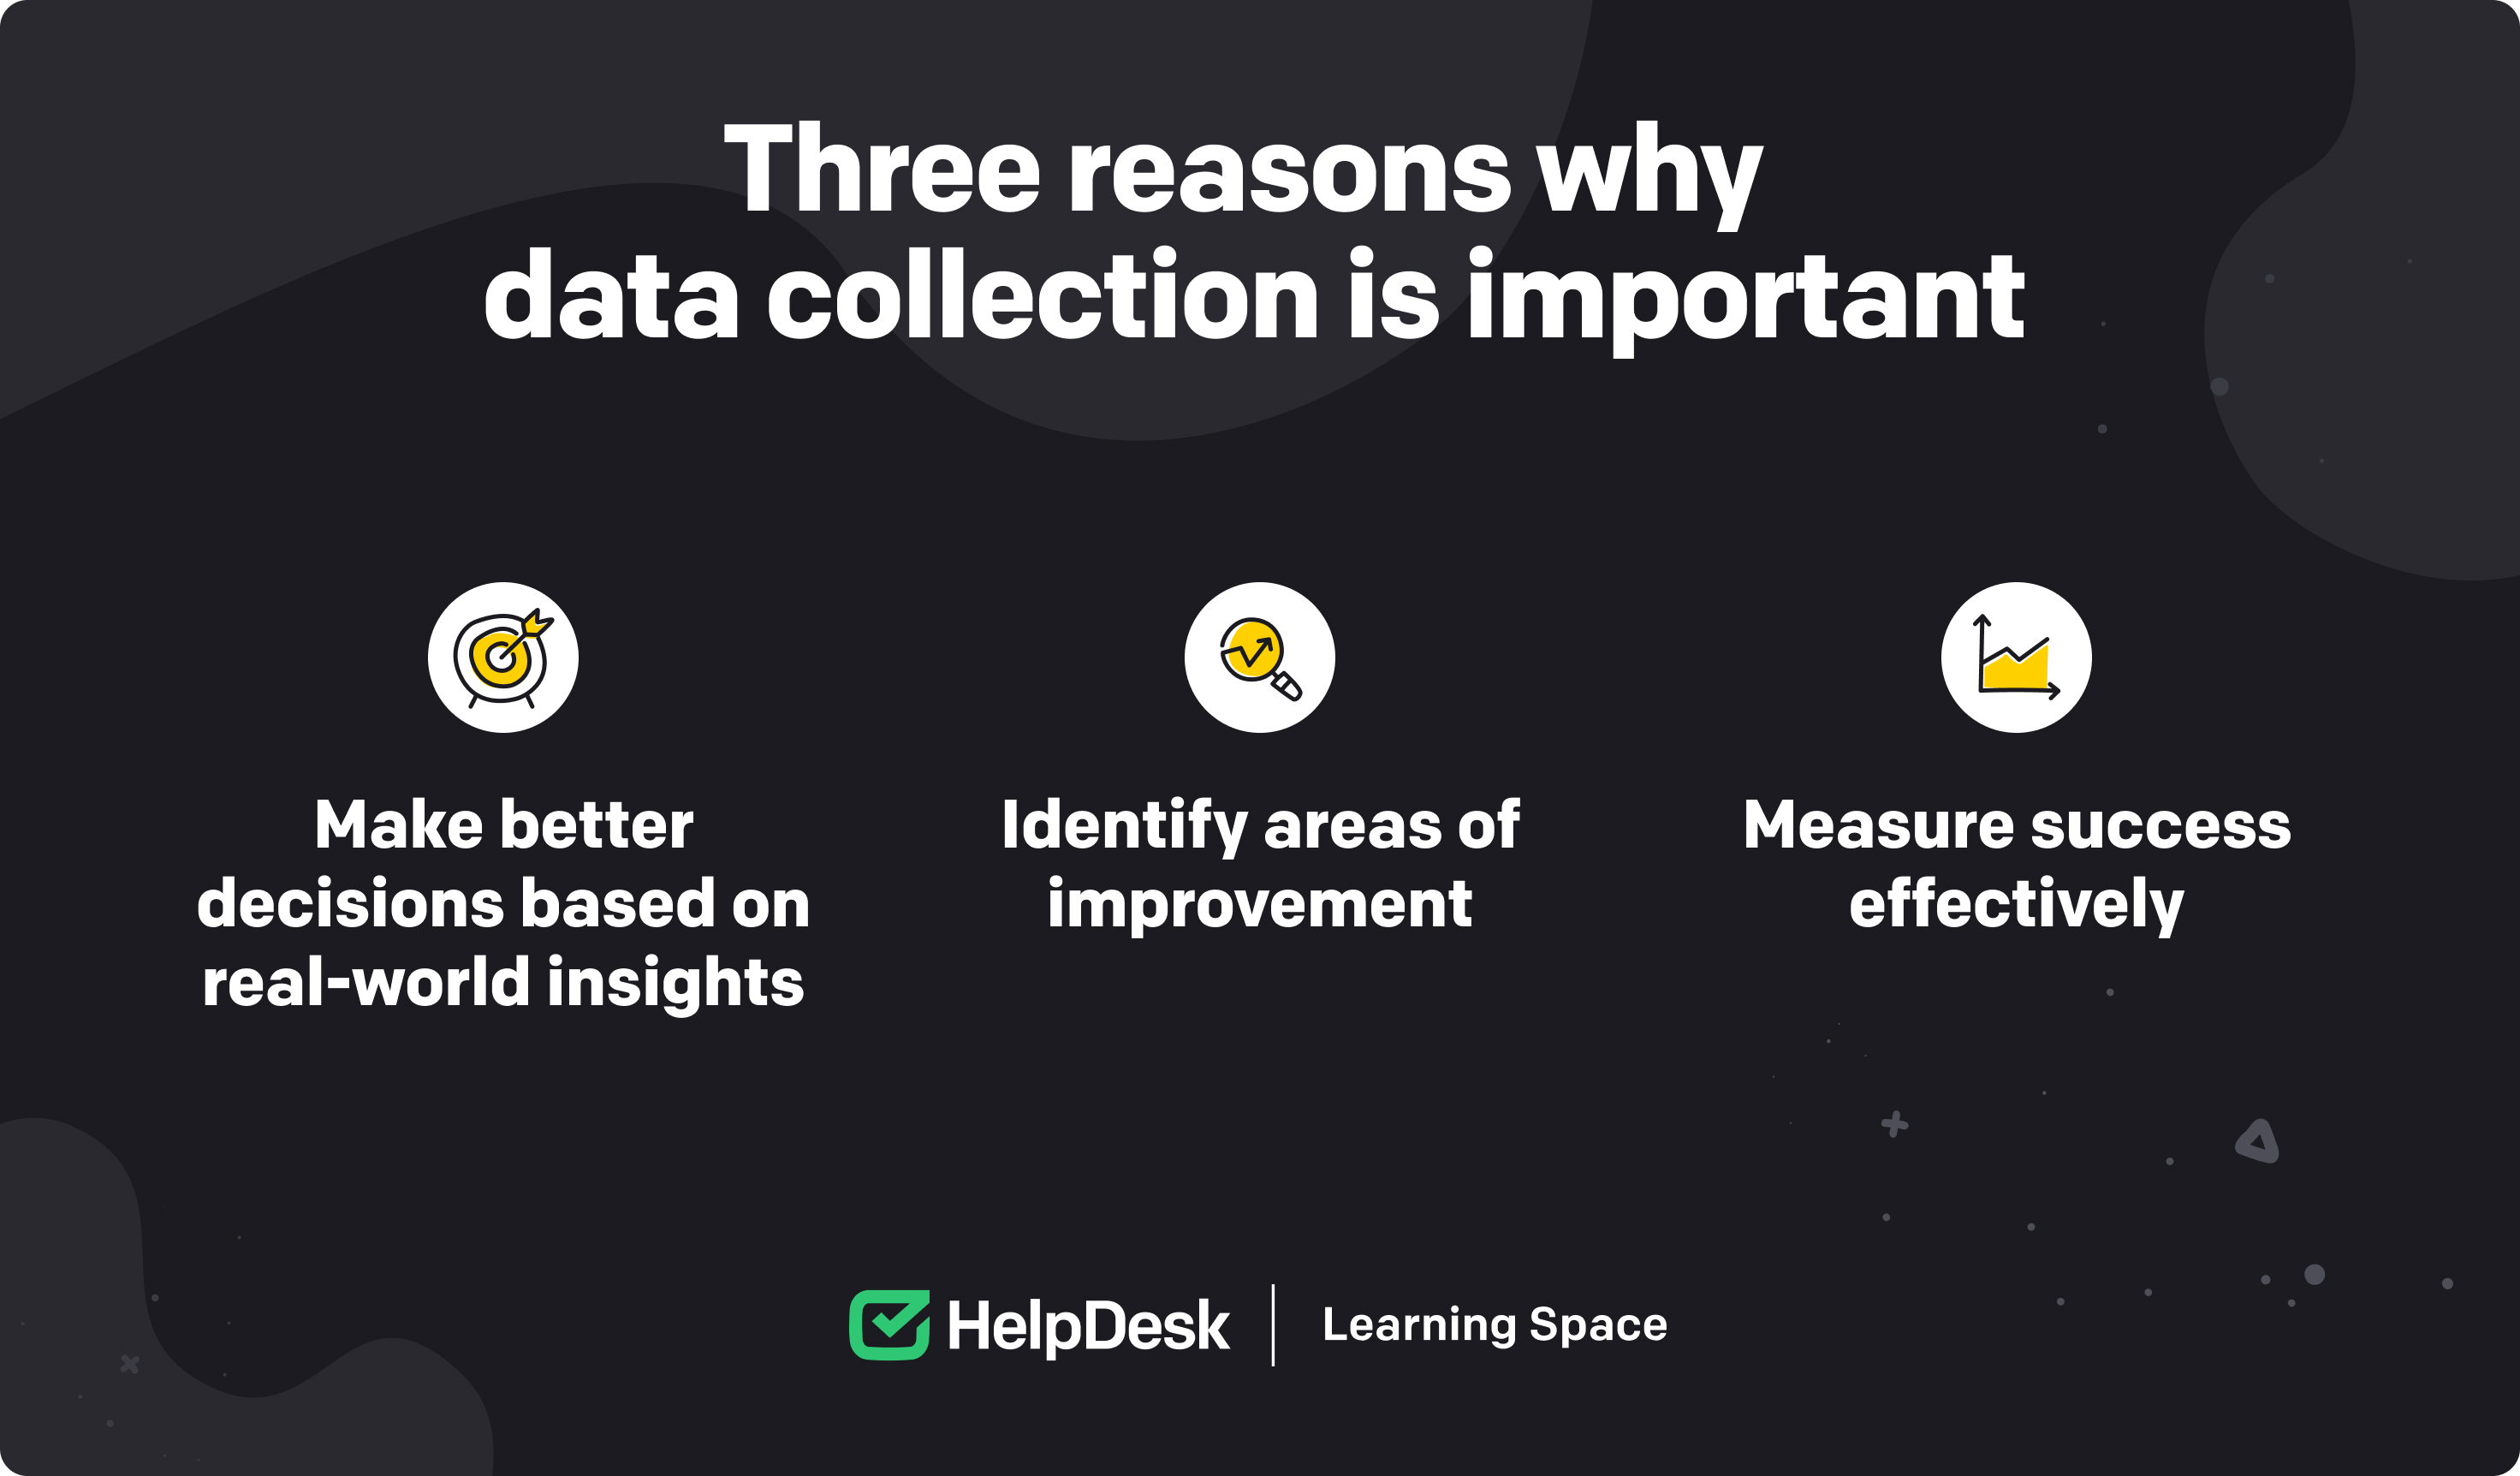 Three reasons why data collection is important.